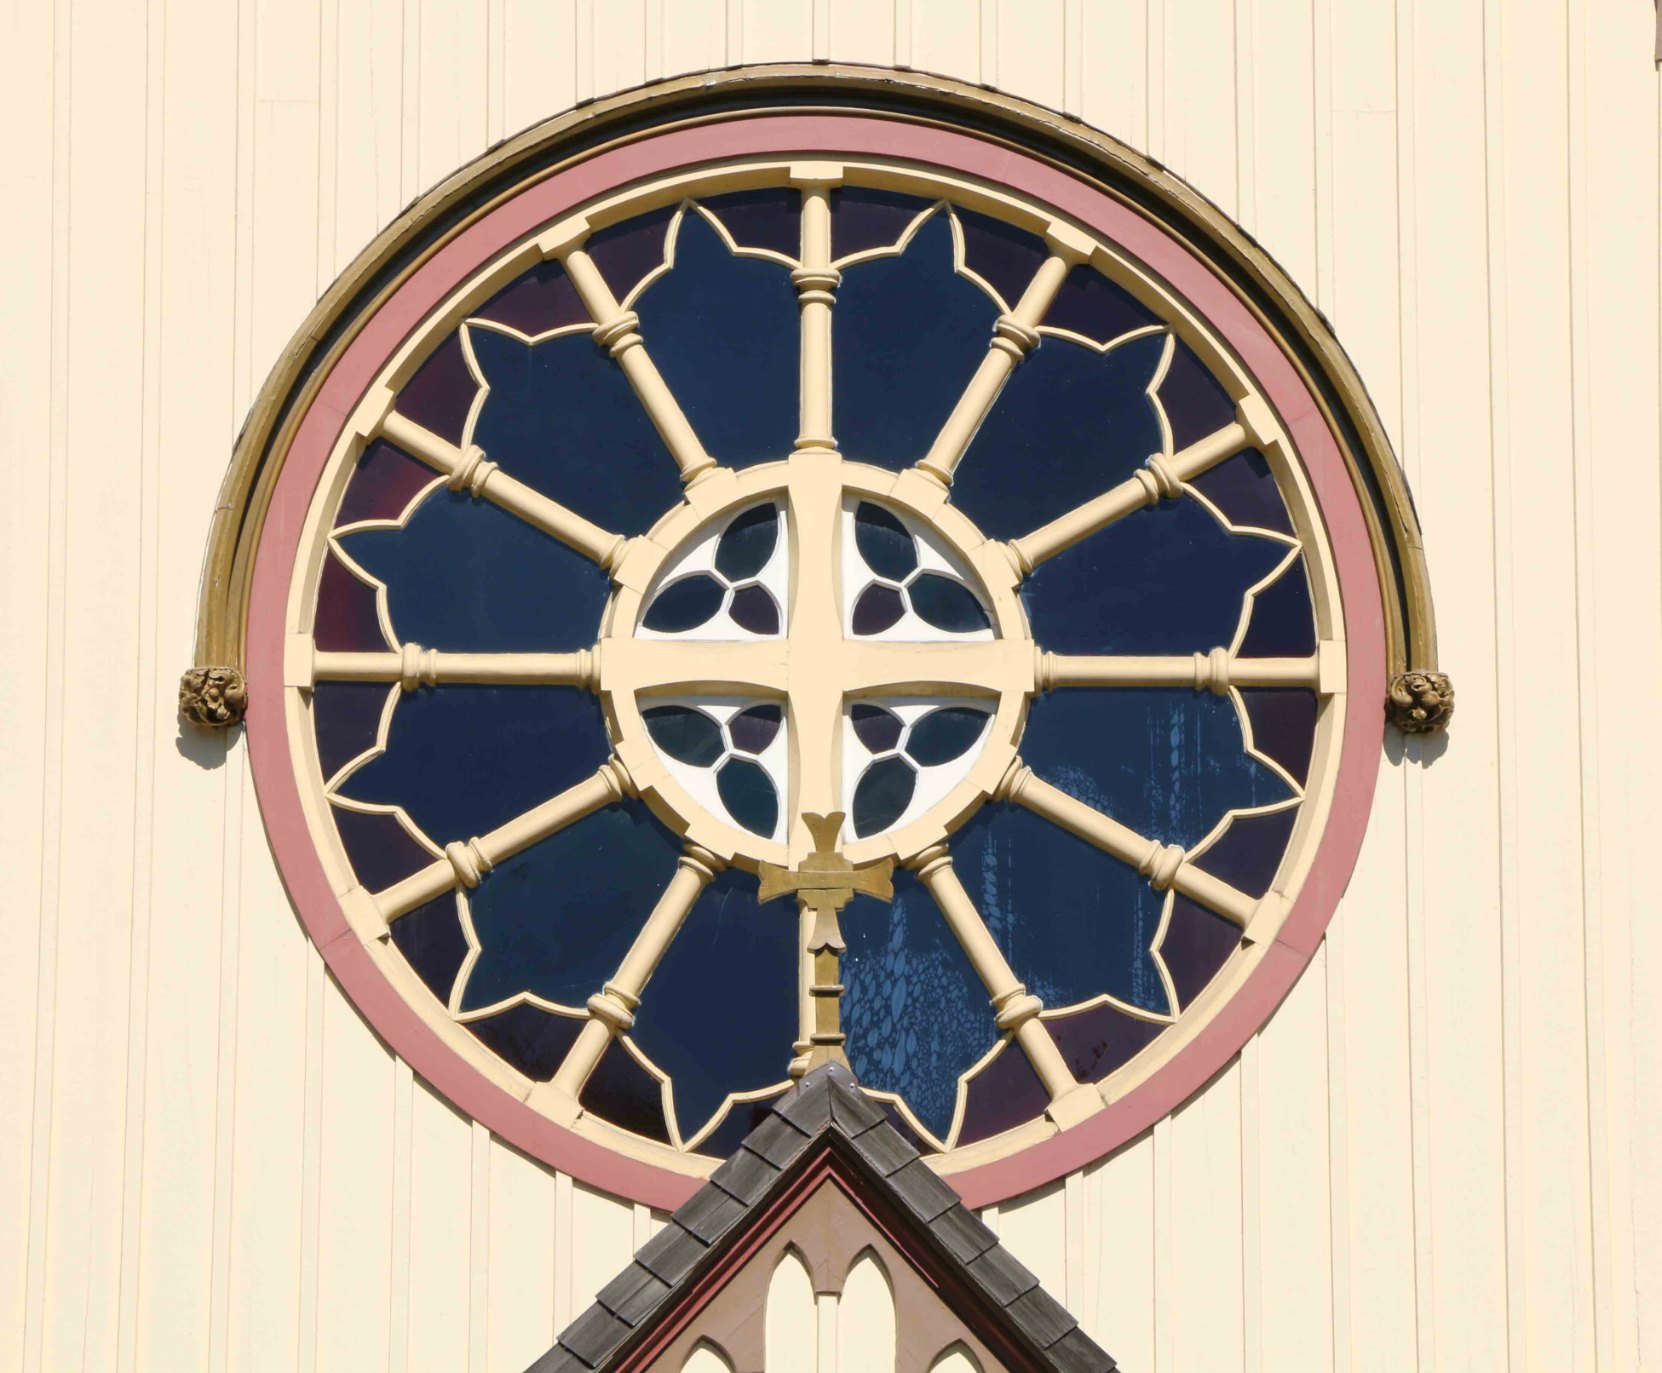 The original east facing rose window on the Church of Our Lord